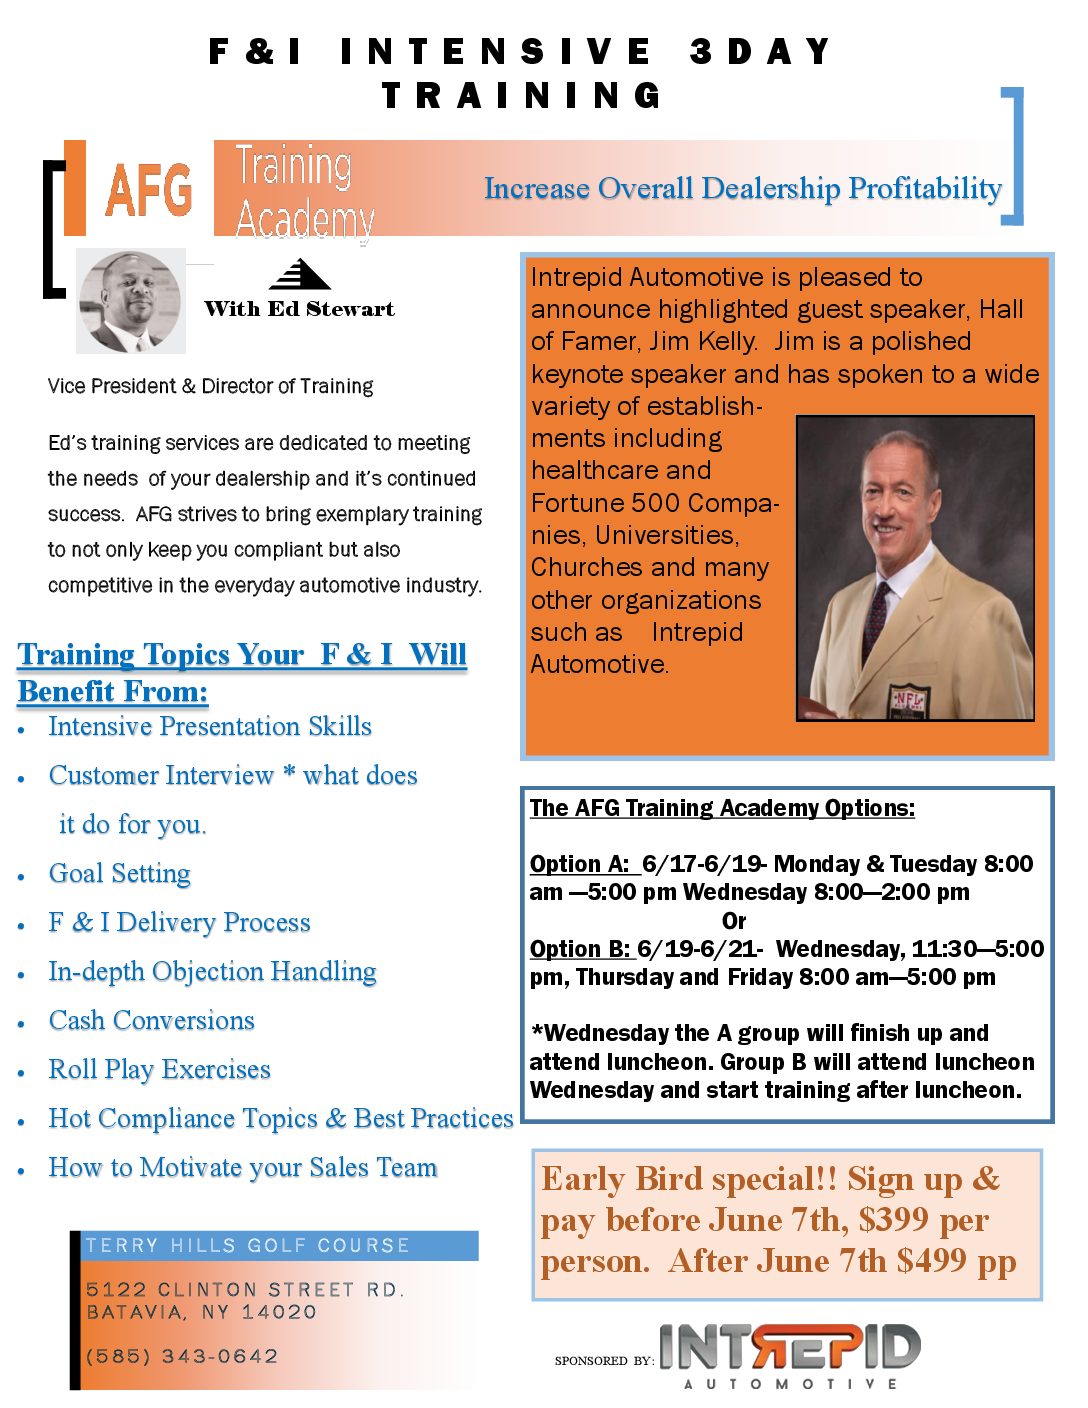 F&I Intensive 3 Day Training Featuring Guest Speaker Jim Kelly!